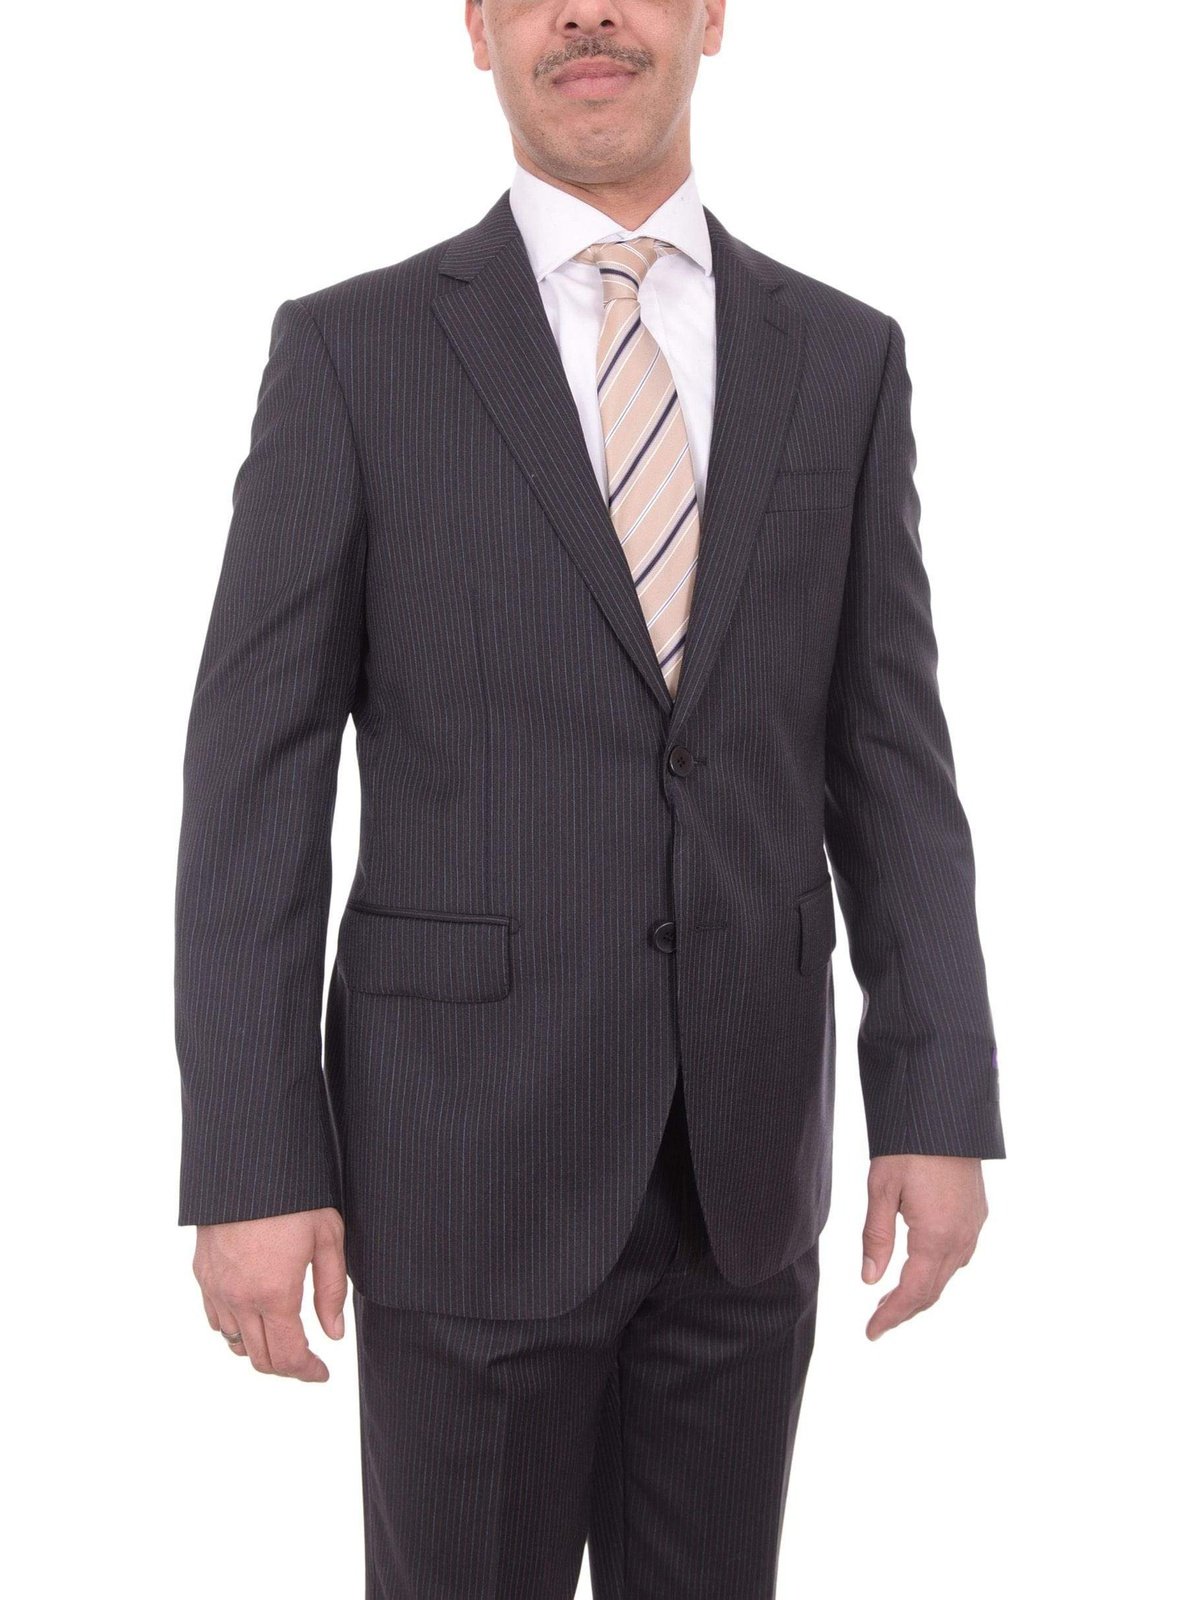 Napoli TWO PIECE SUITS Mens Napoli Charcoal Gray Pinstriped Half Canvassed Super 180s Wool Suit